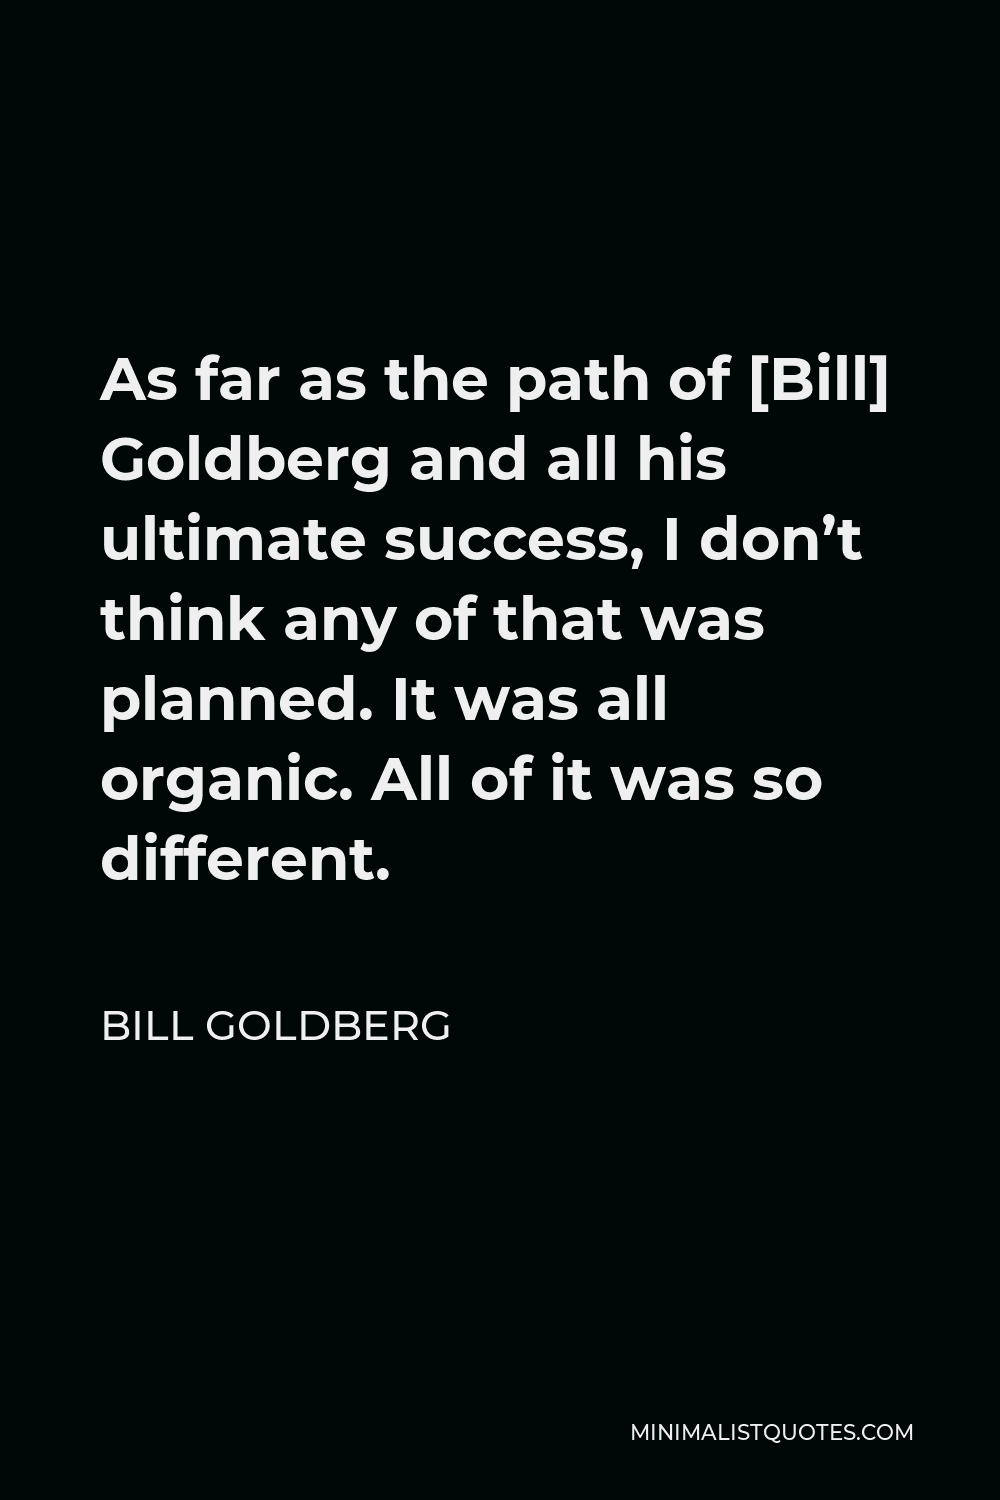 Bill Goldberg Quote - As far as the path of [Bill] Goldberg and all his ultimate success, I don’t think any of that was planned. It was all organic. All of it was so different.